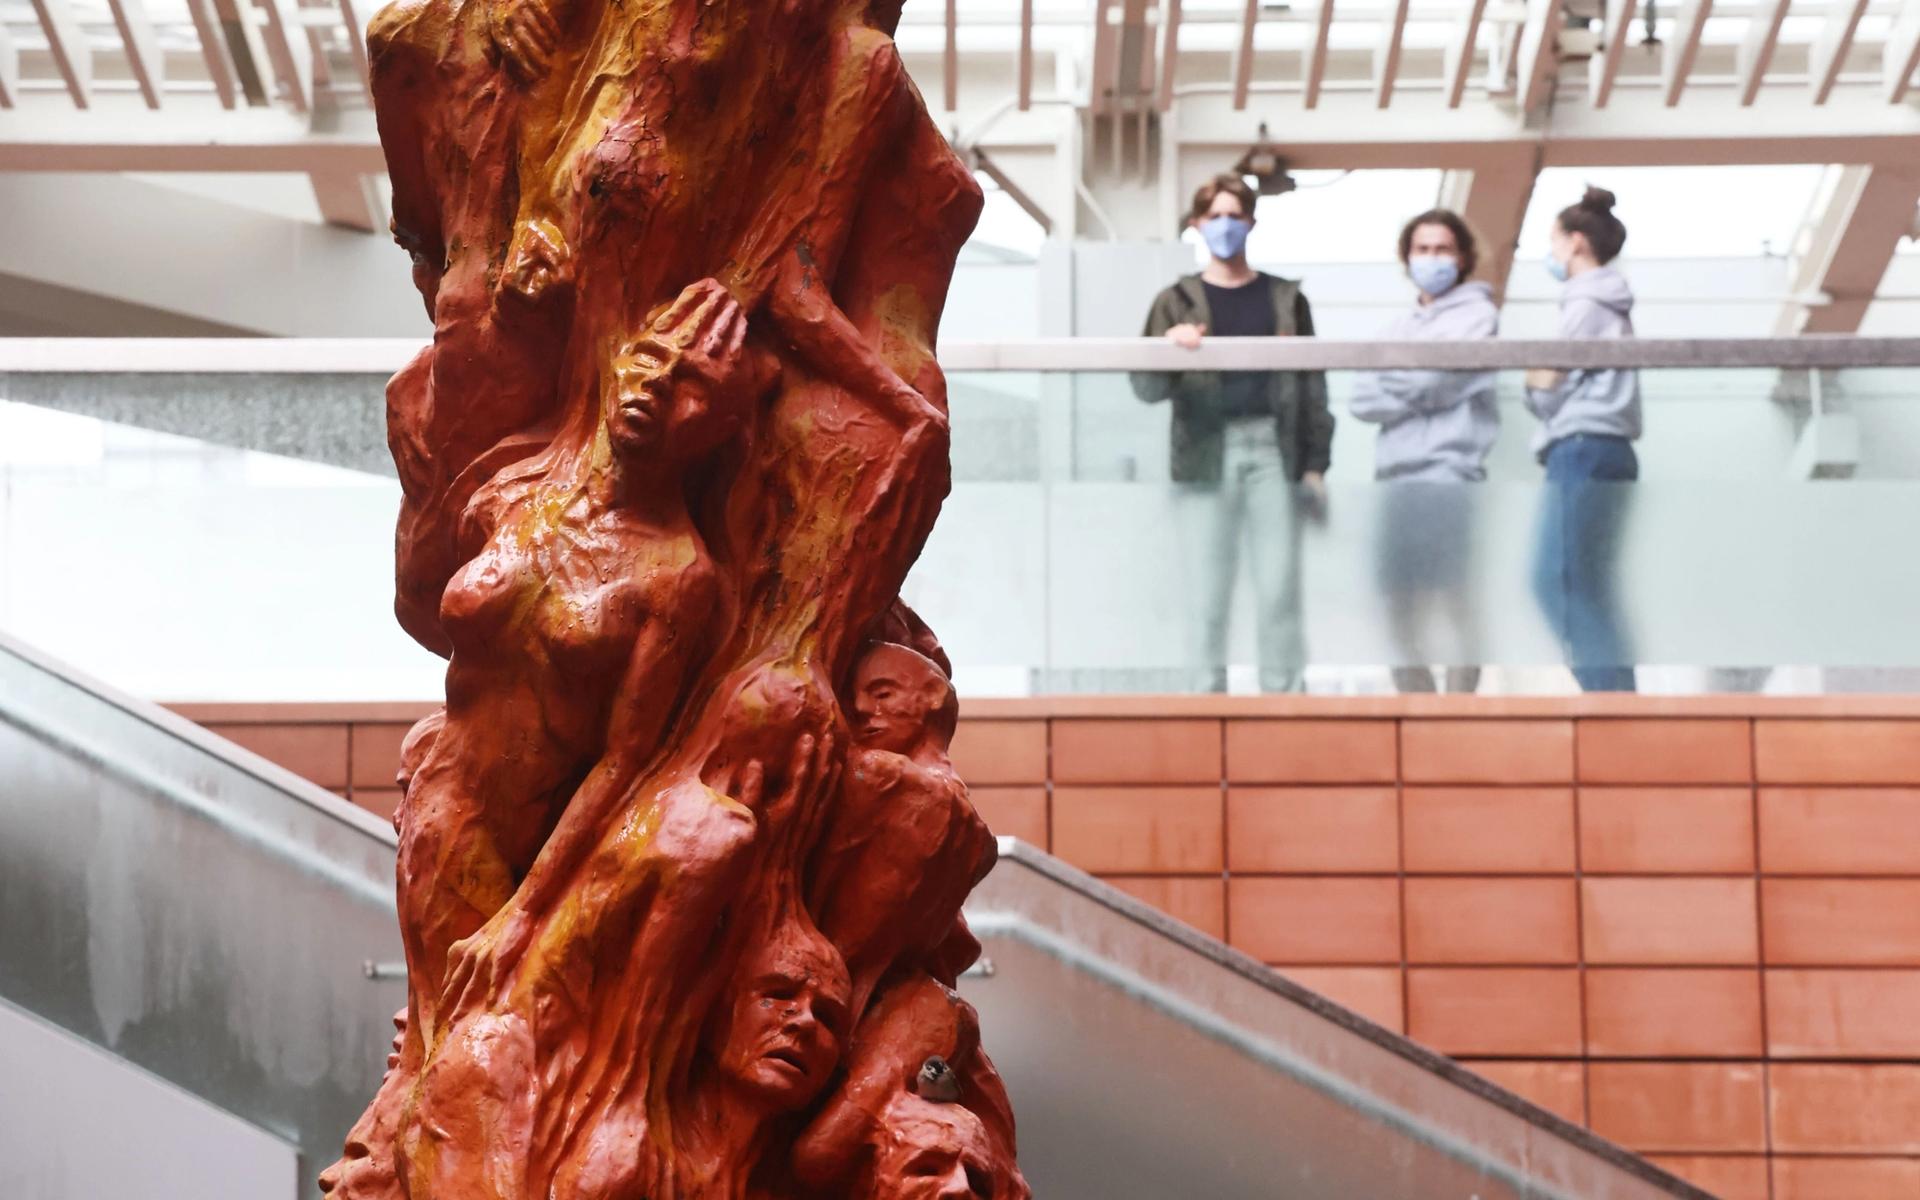 Jens Galschiøt's Pillar Of Shame (1997) was removed from the University of Hong Kong last year. Courtesy of the artist